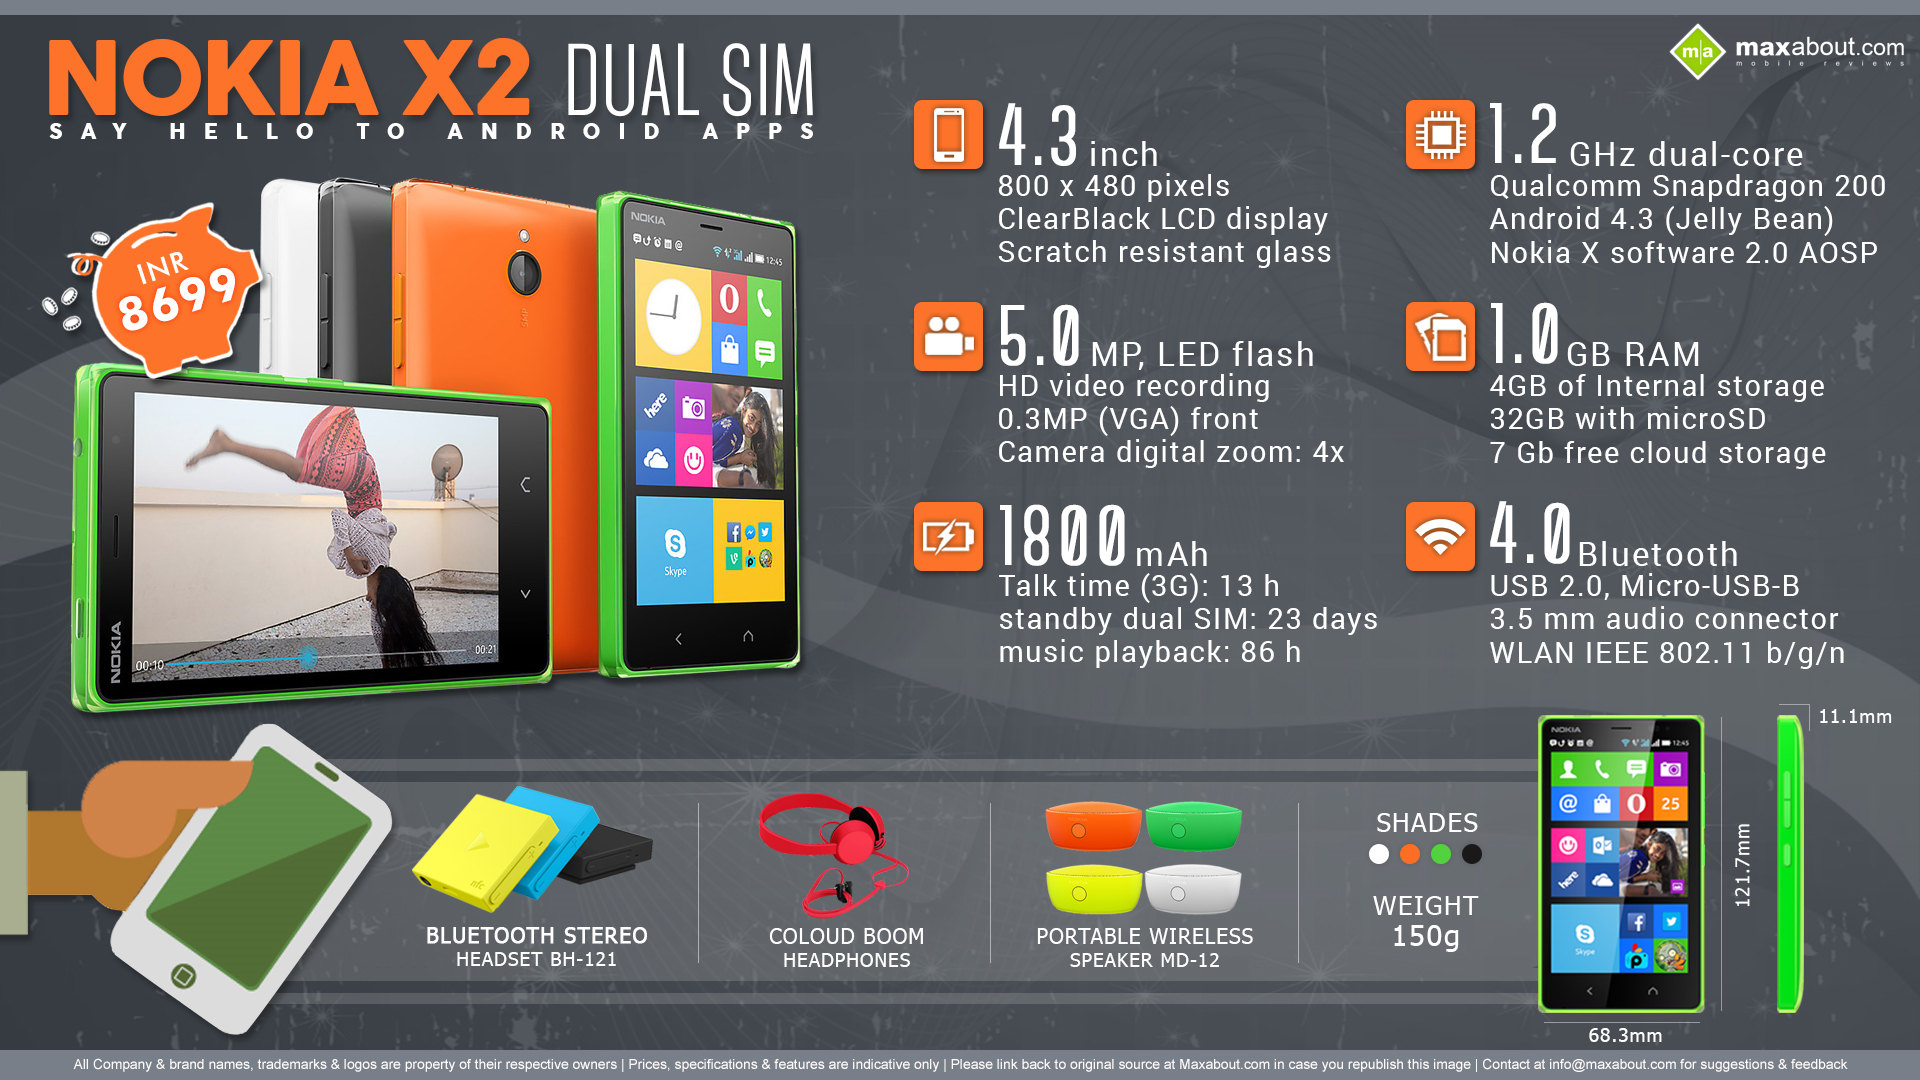 Quick Facts About Nokia X2 Android Dual Sim Smartphone